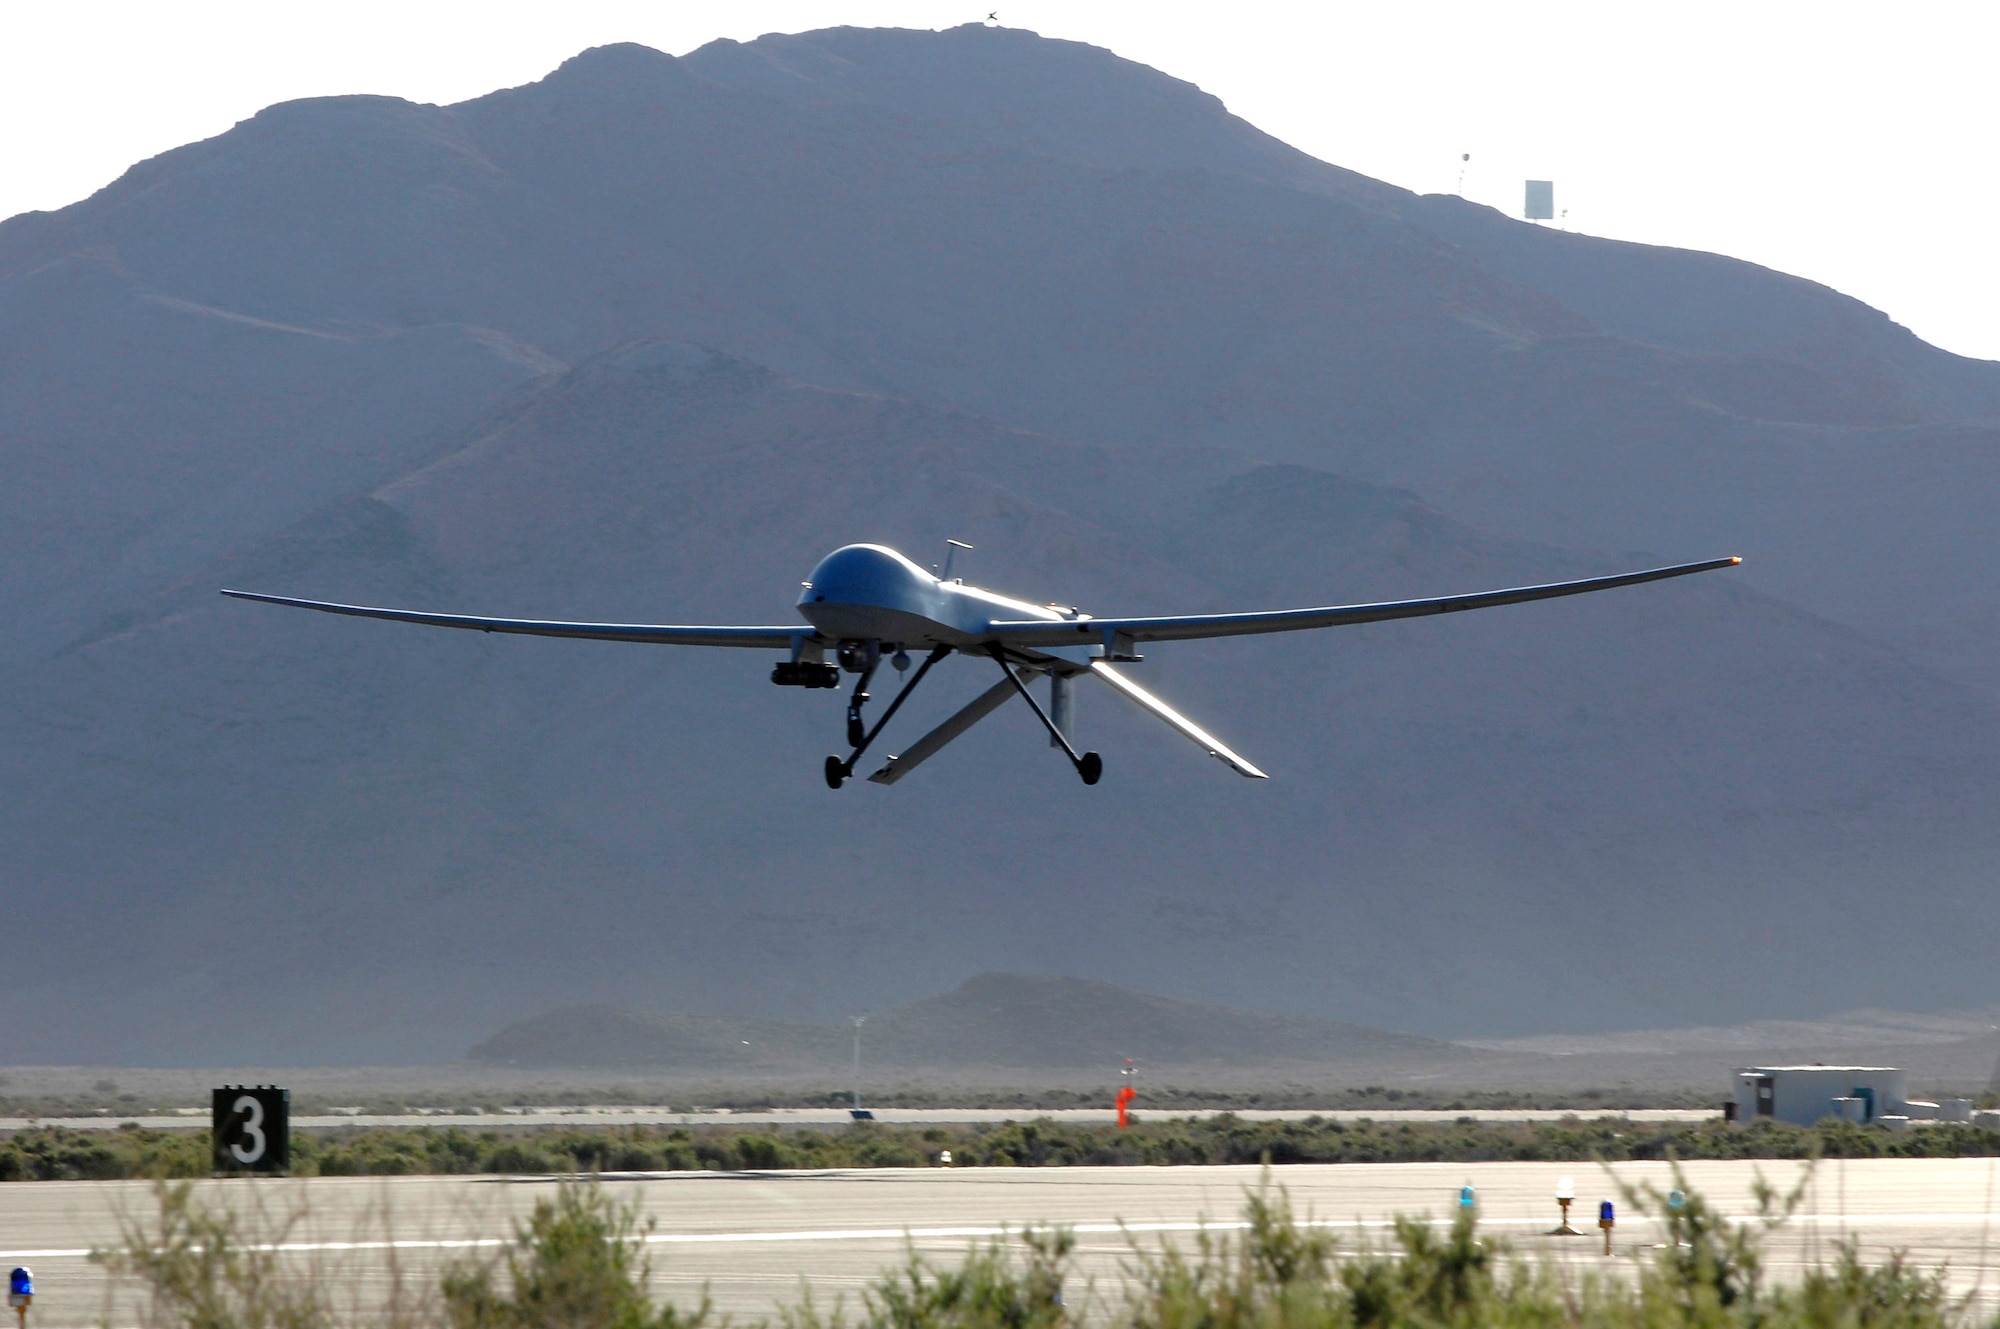 An MQ-1 Predator unmanned aerial vehicle takes off from Creech Air Force Base, Nev., May 11, for a training sortie over the Nevada desert.  (U.S. Air Force photo/Staff Sgt. Brian Ferguson)